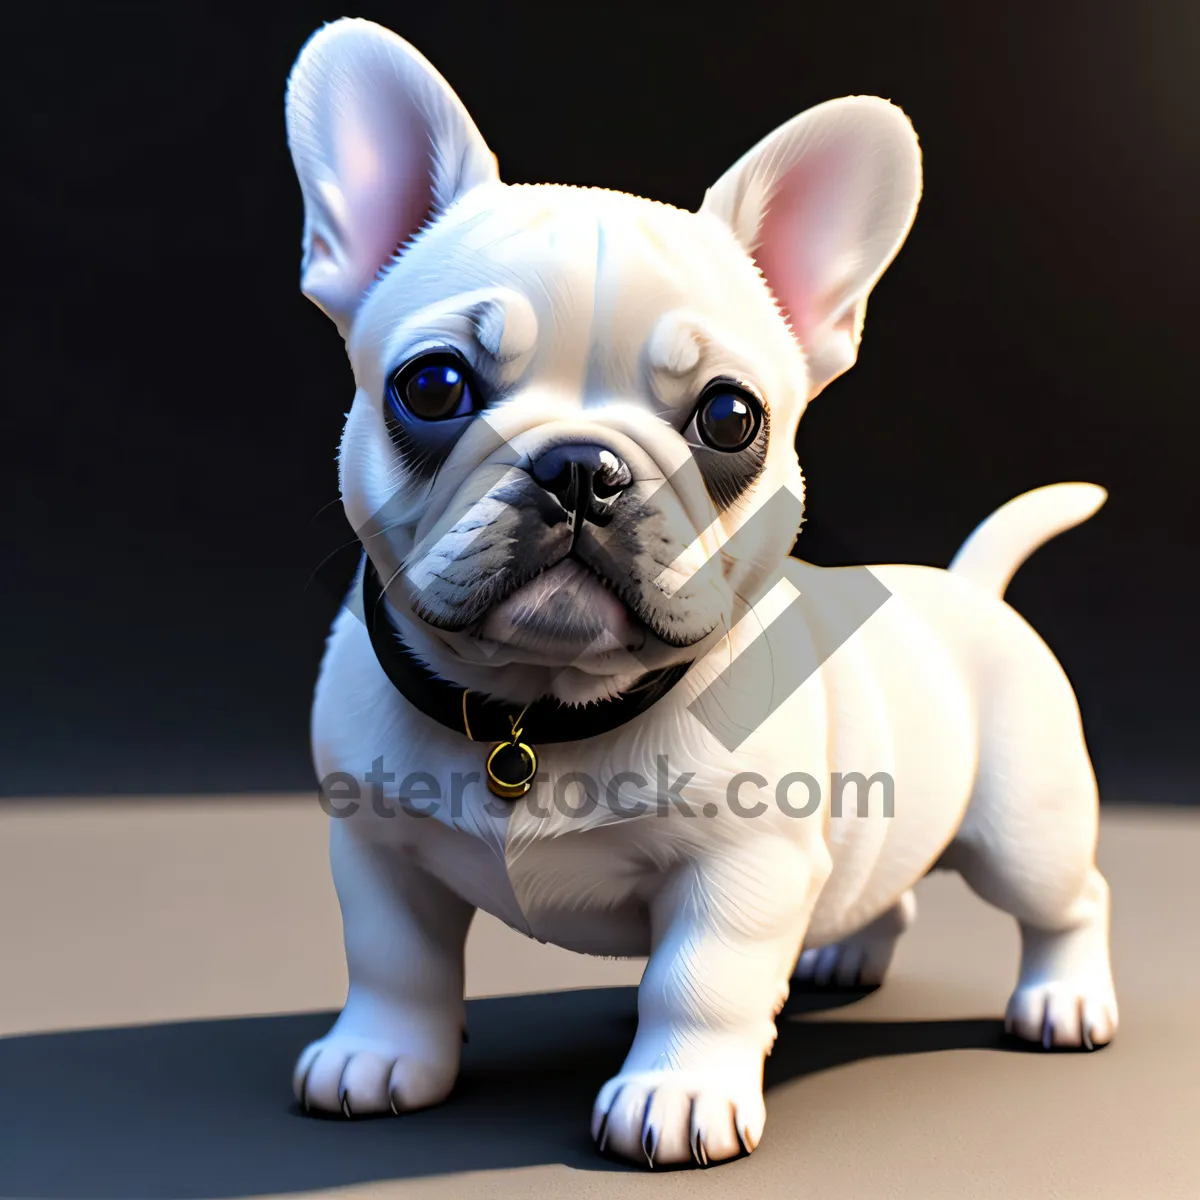 Picture of Cute Bulldog Puppy Portrait - Adorable Wrinkled Friend